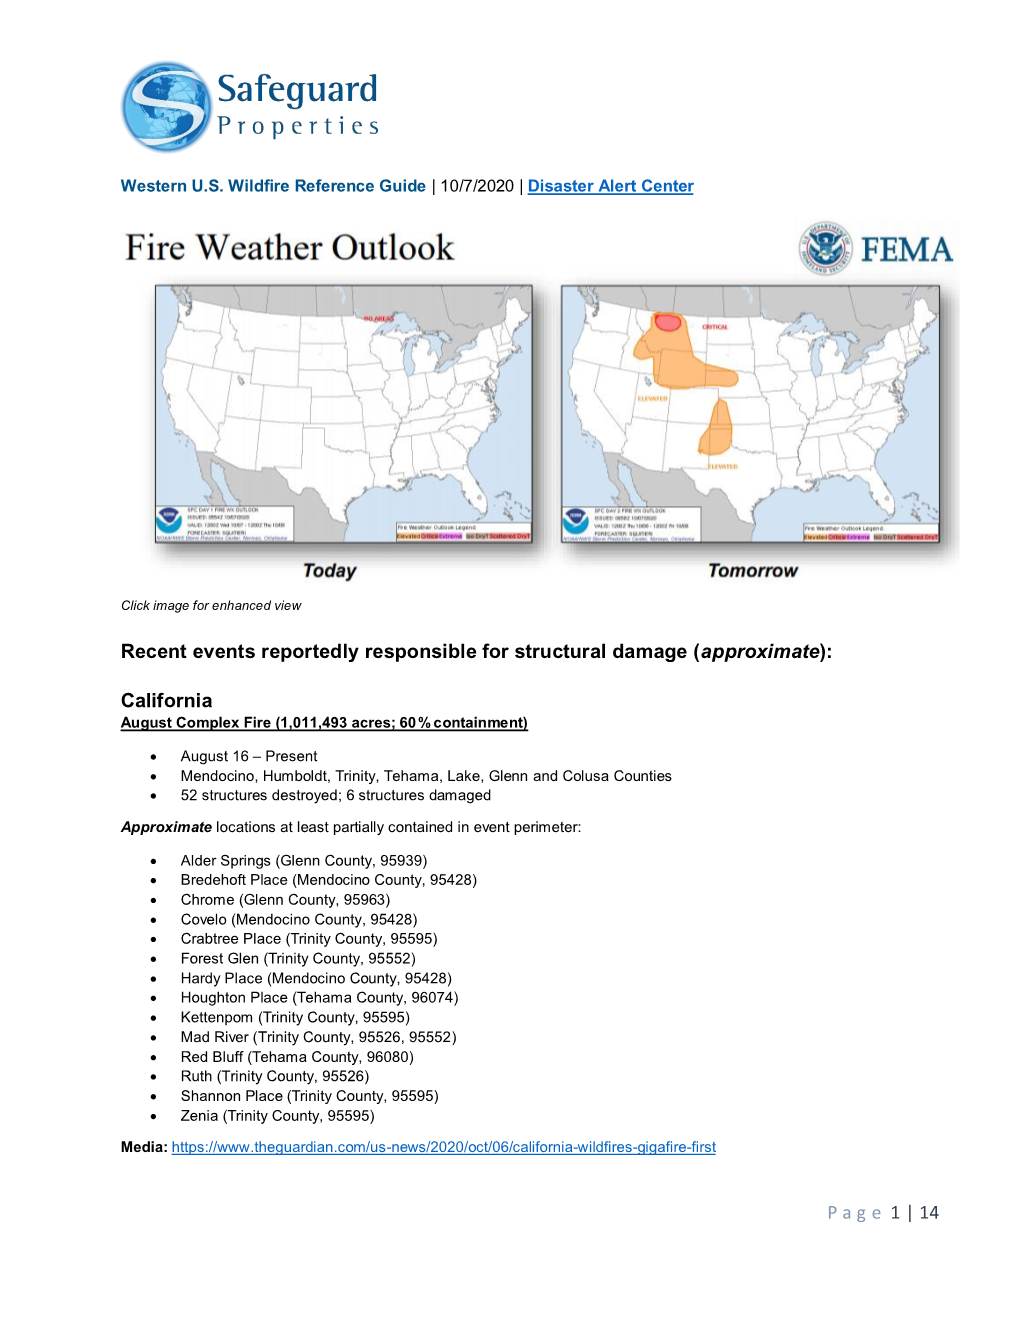 Safeguard Properties Western U.S. Wildfire Reference Guide